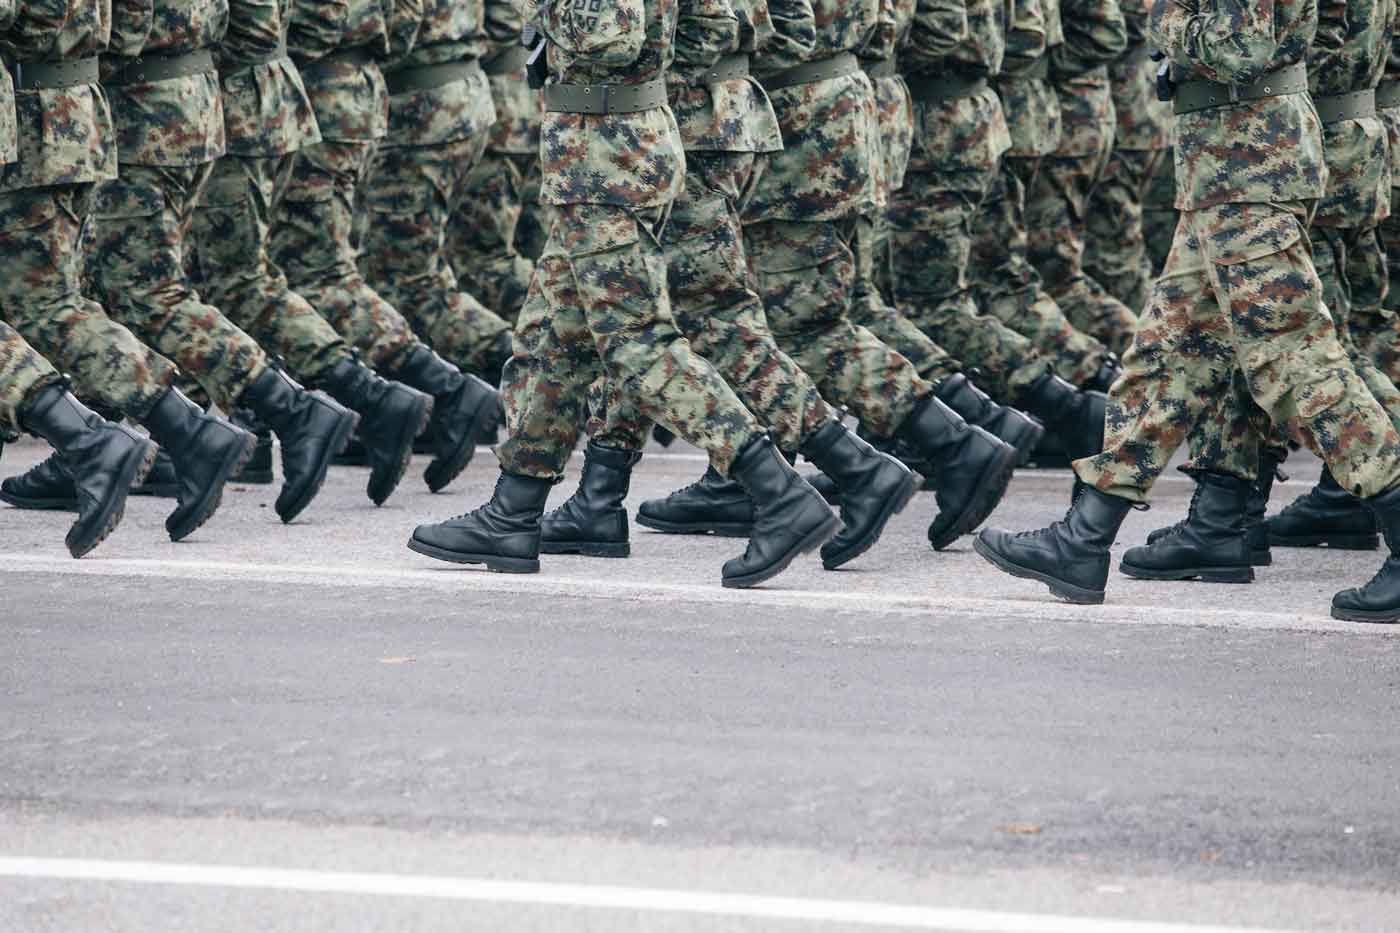 soldiers walking in military camo uniform and military boots